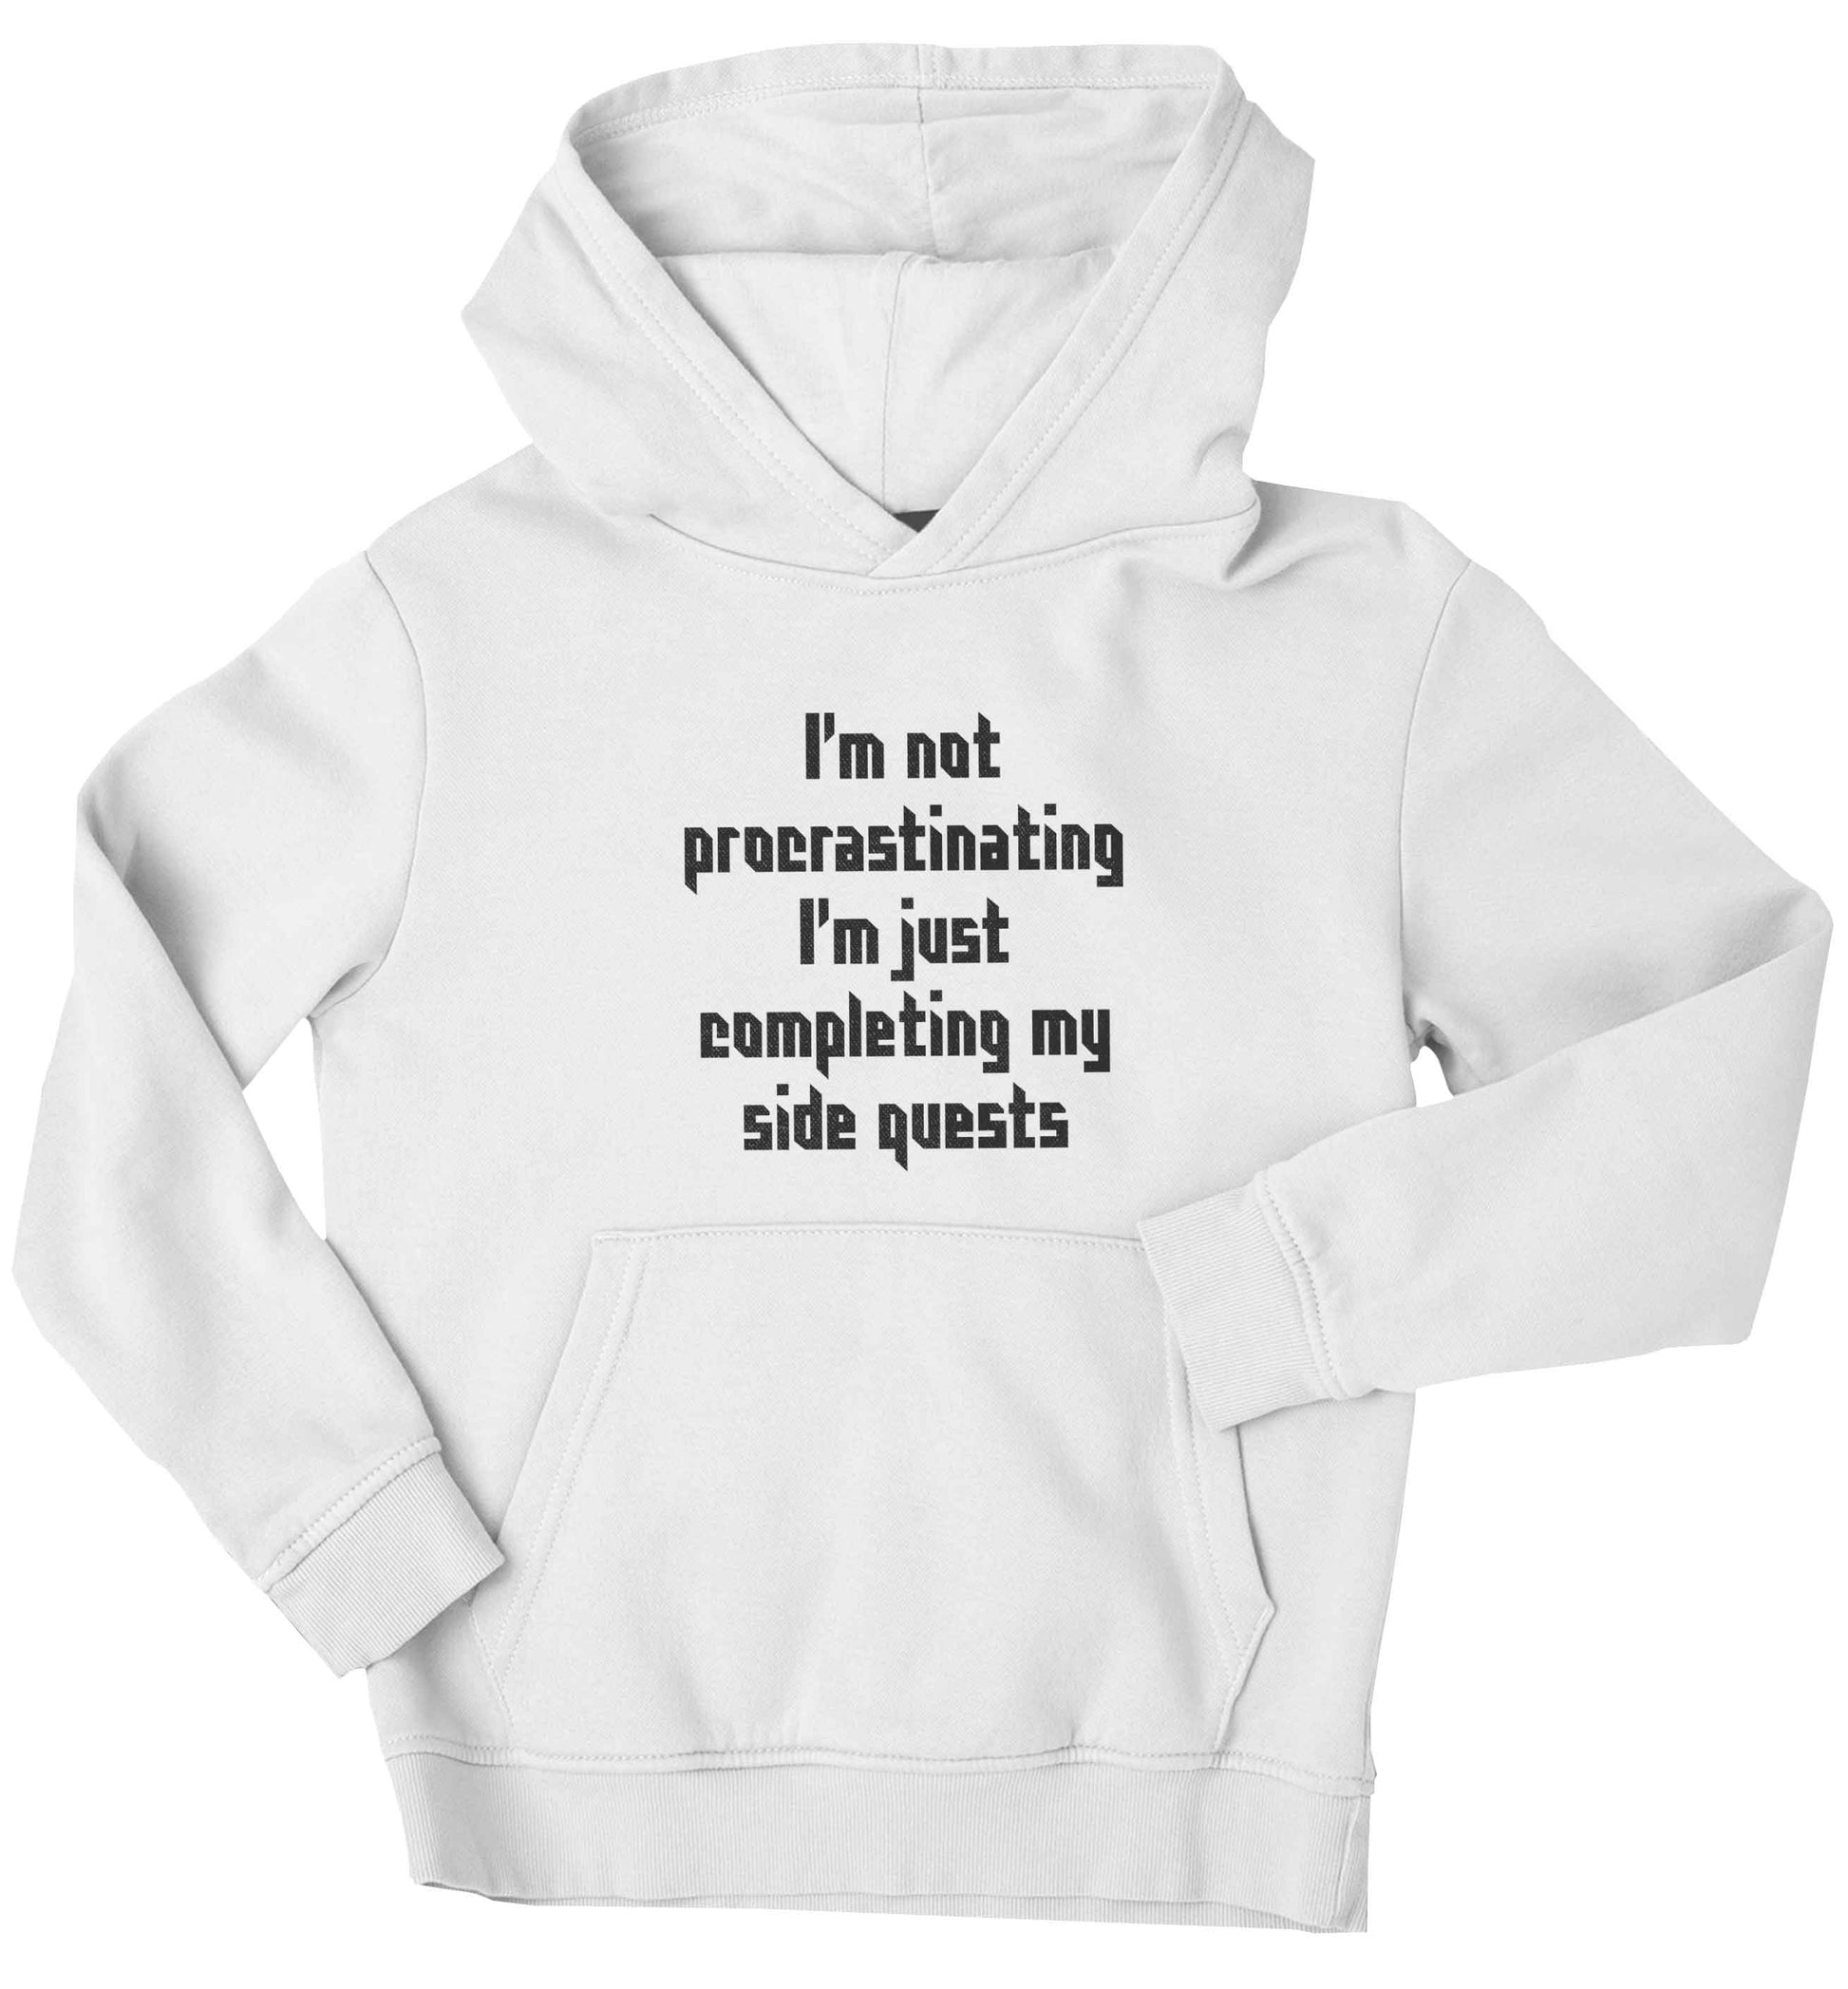 I'm not procrastinating I'm just completing my side quests children's white hoodie 12-13 Years